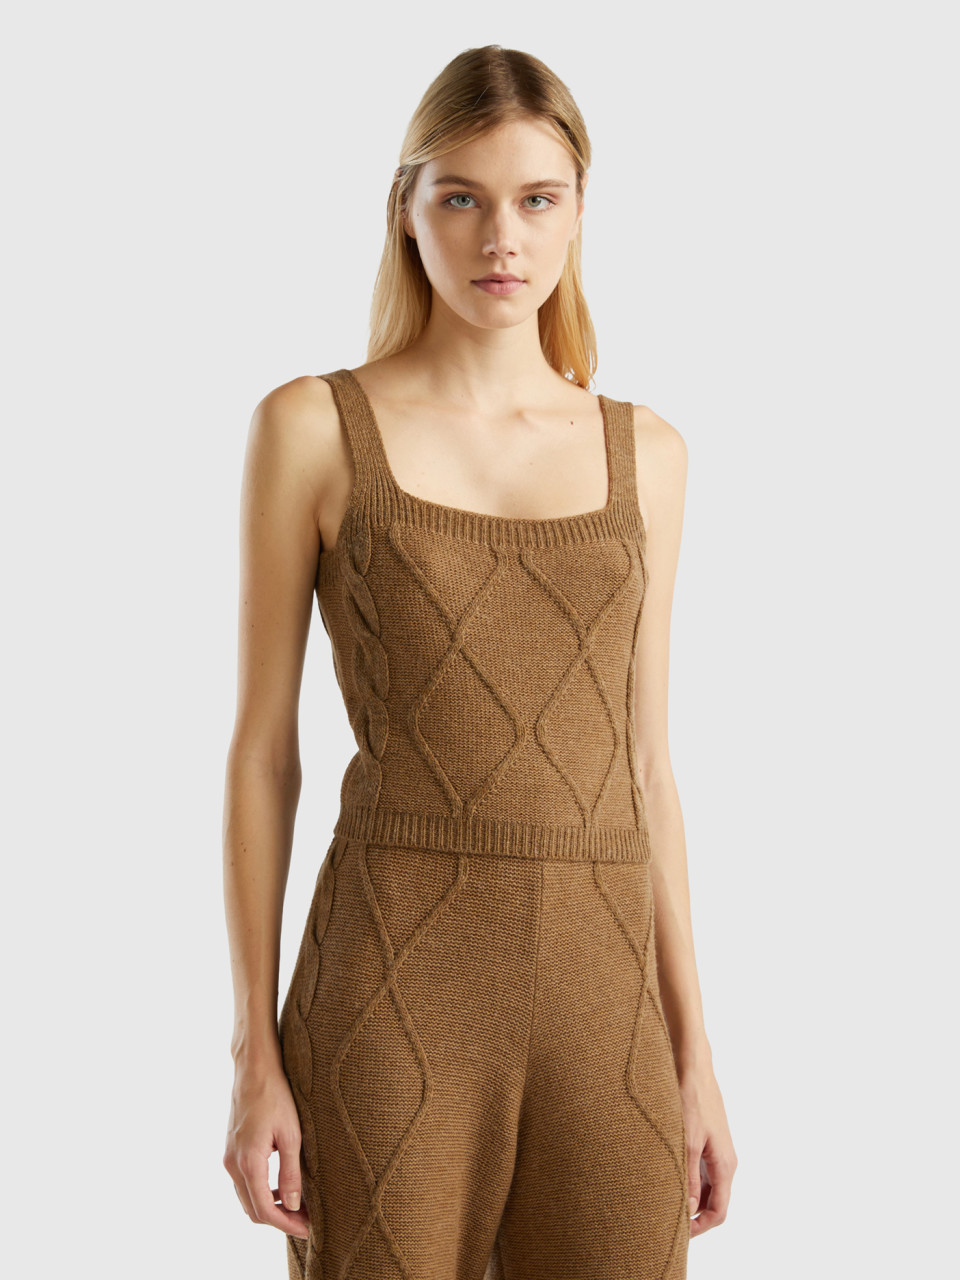 Benetton, Knitted Crop Top With Cables And Diamonds, Camel, Women